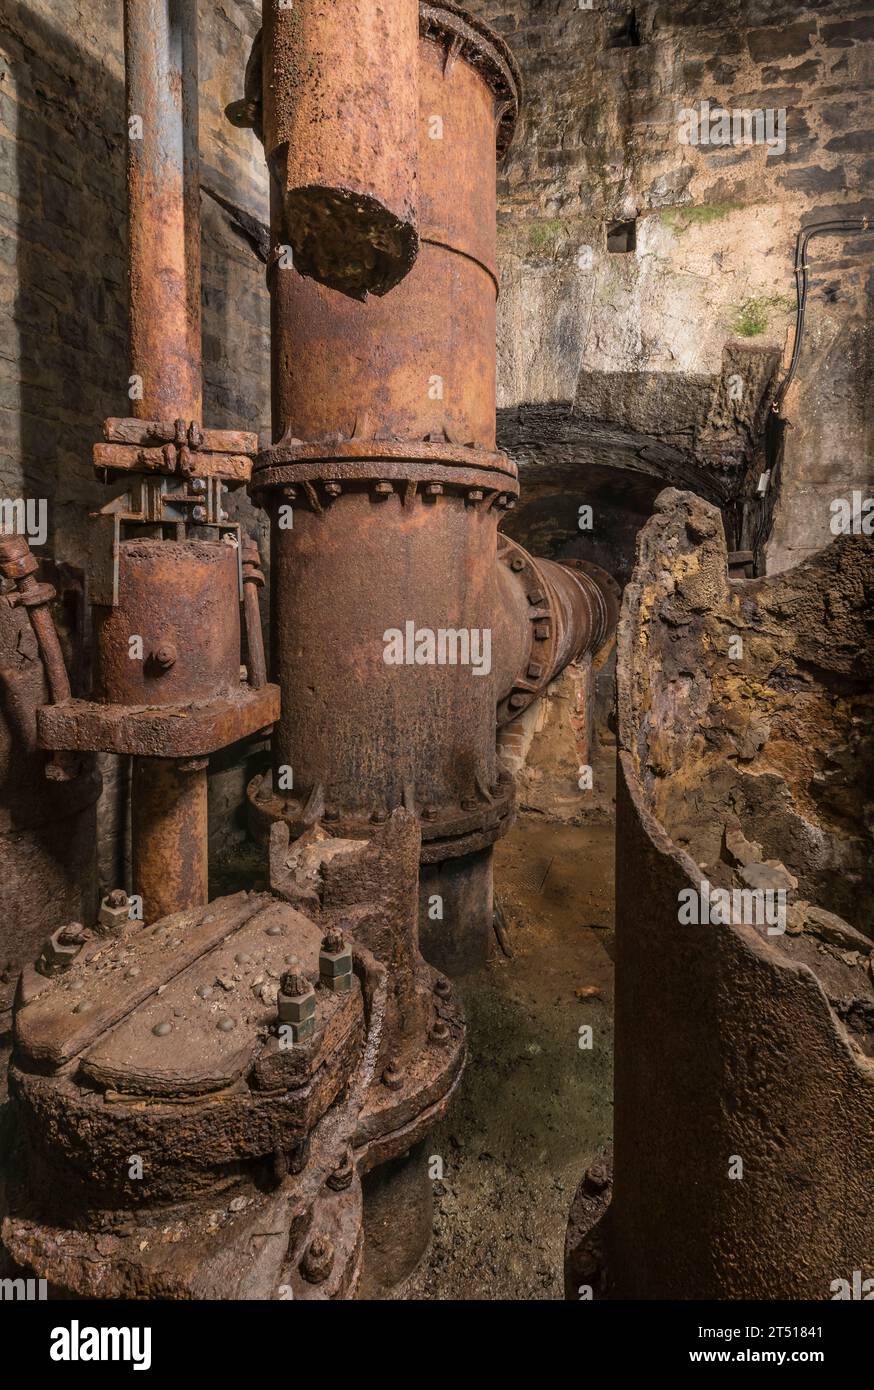 rusty pipes in a abandoned mining site Stock Photo